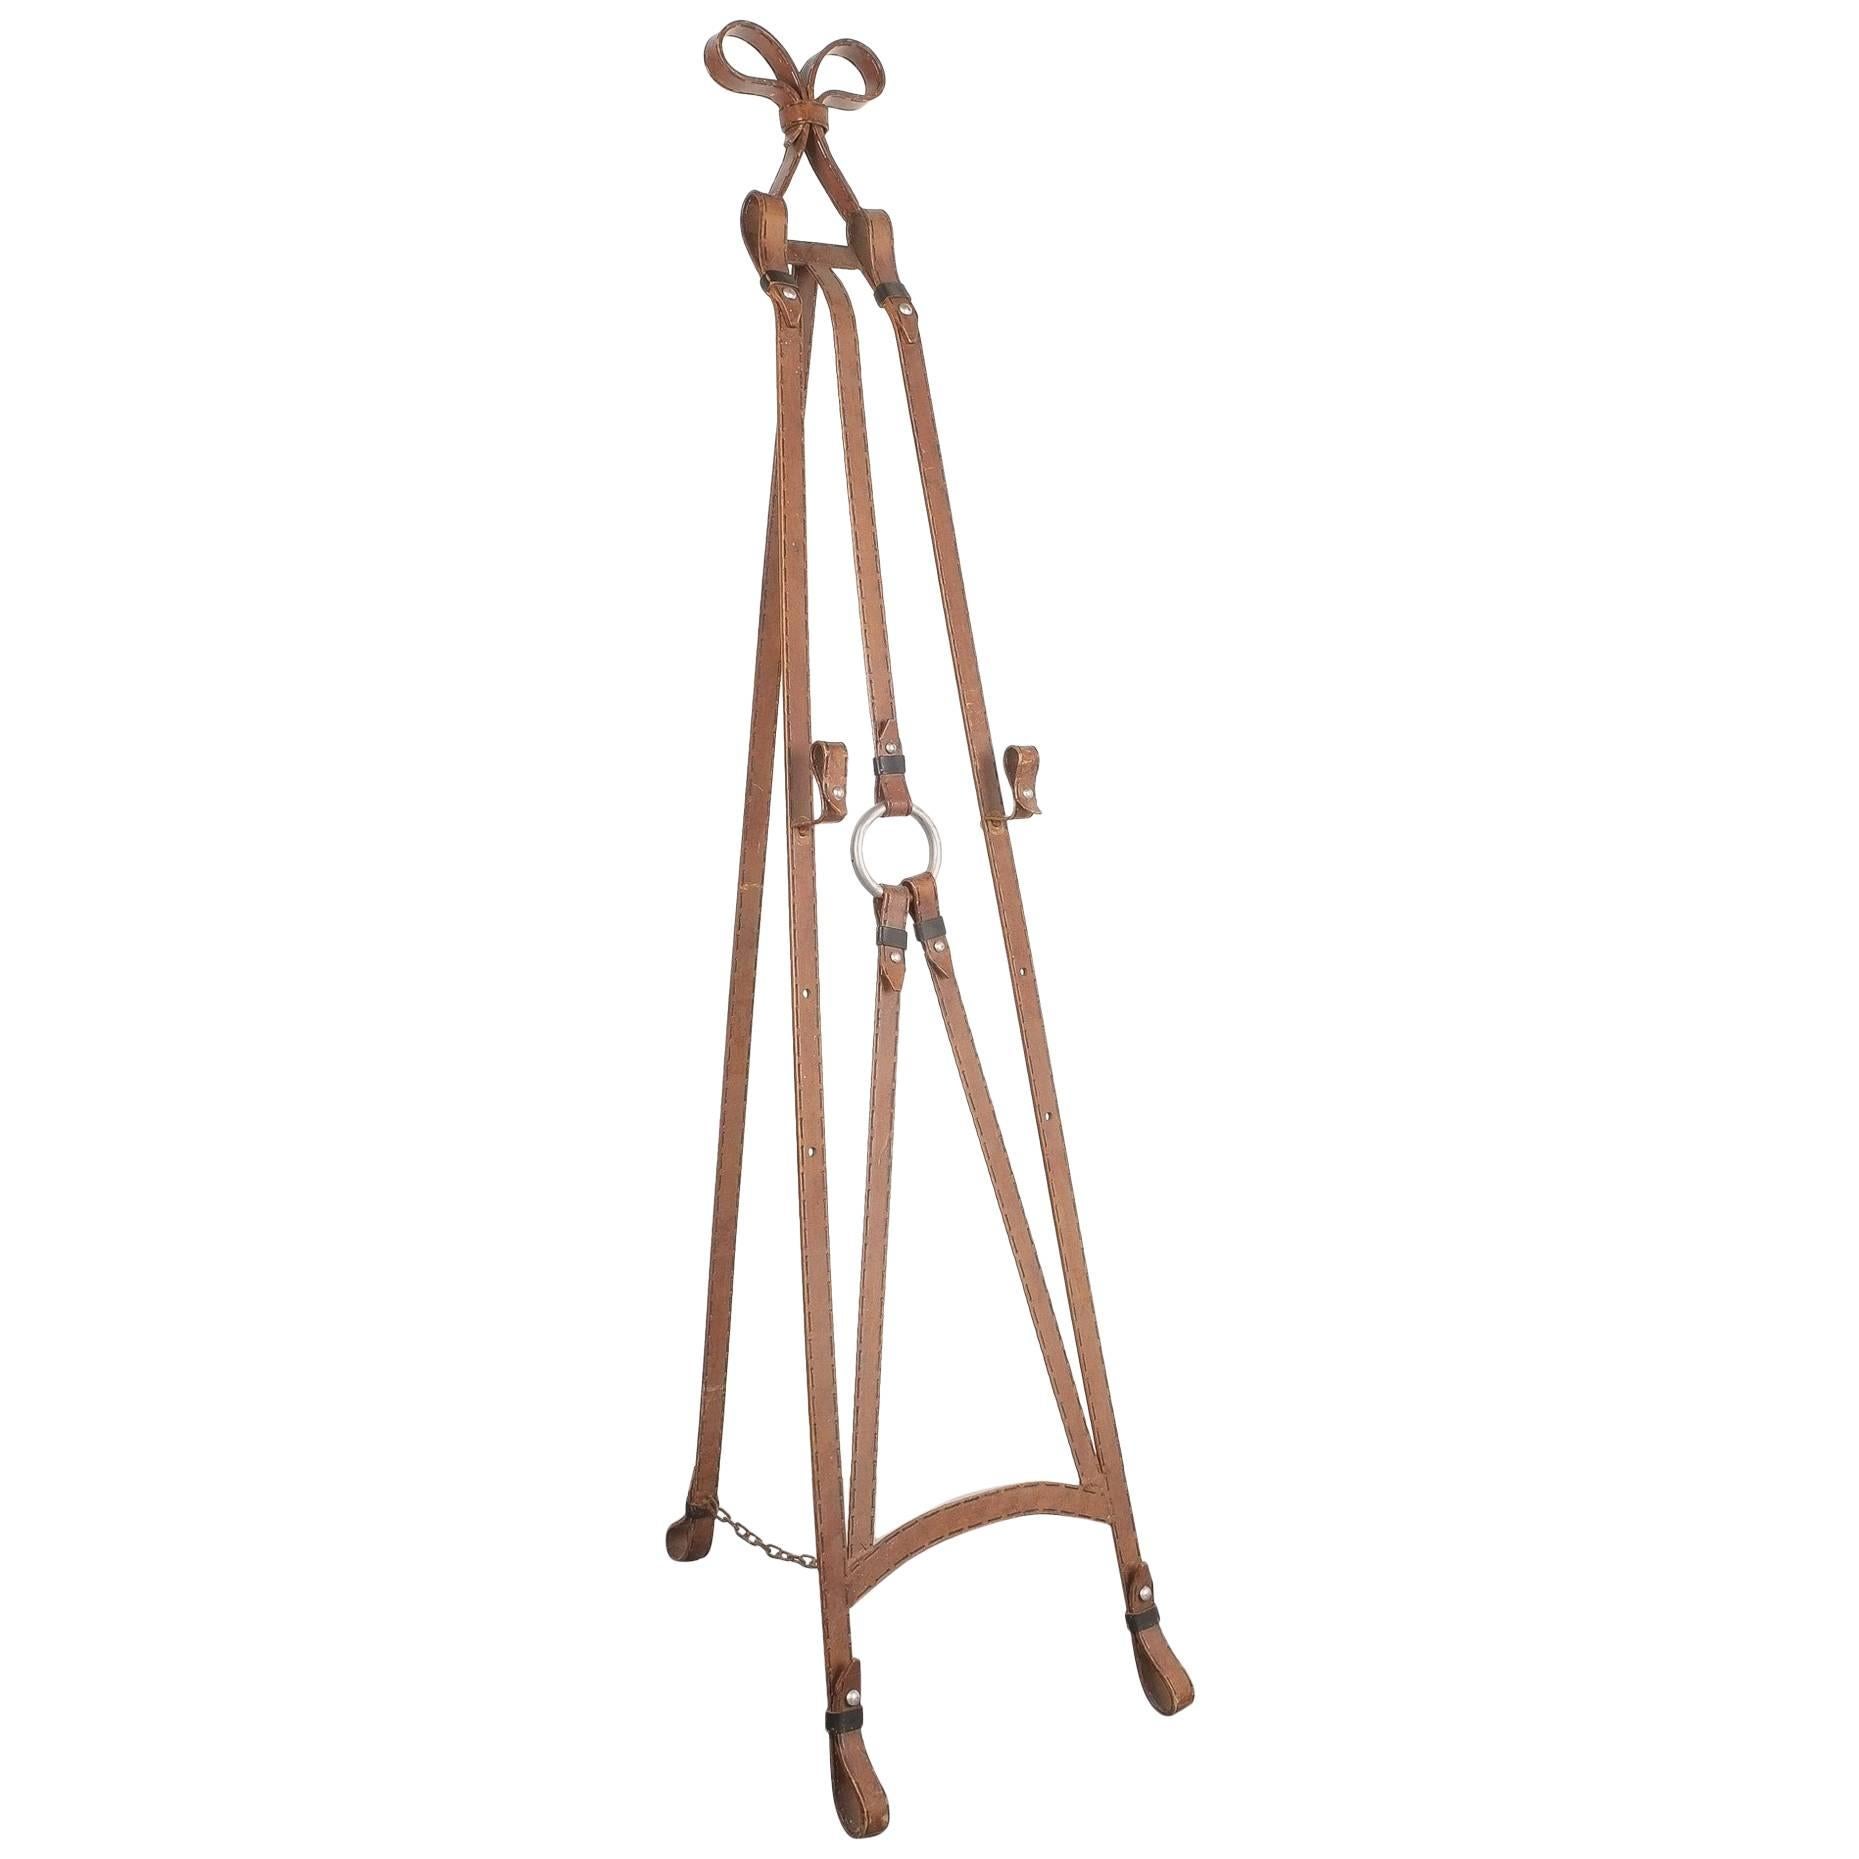 Faux Leather Ferblanterie Wrought Iron Easel, France, circa 1950